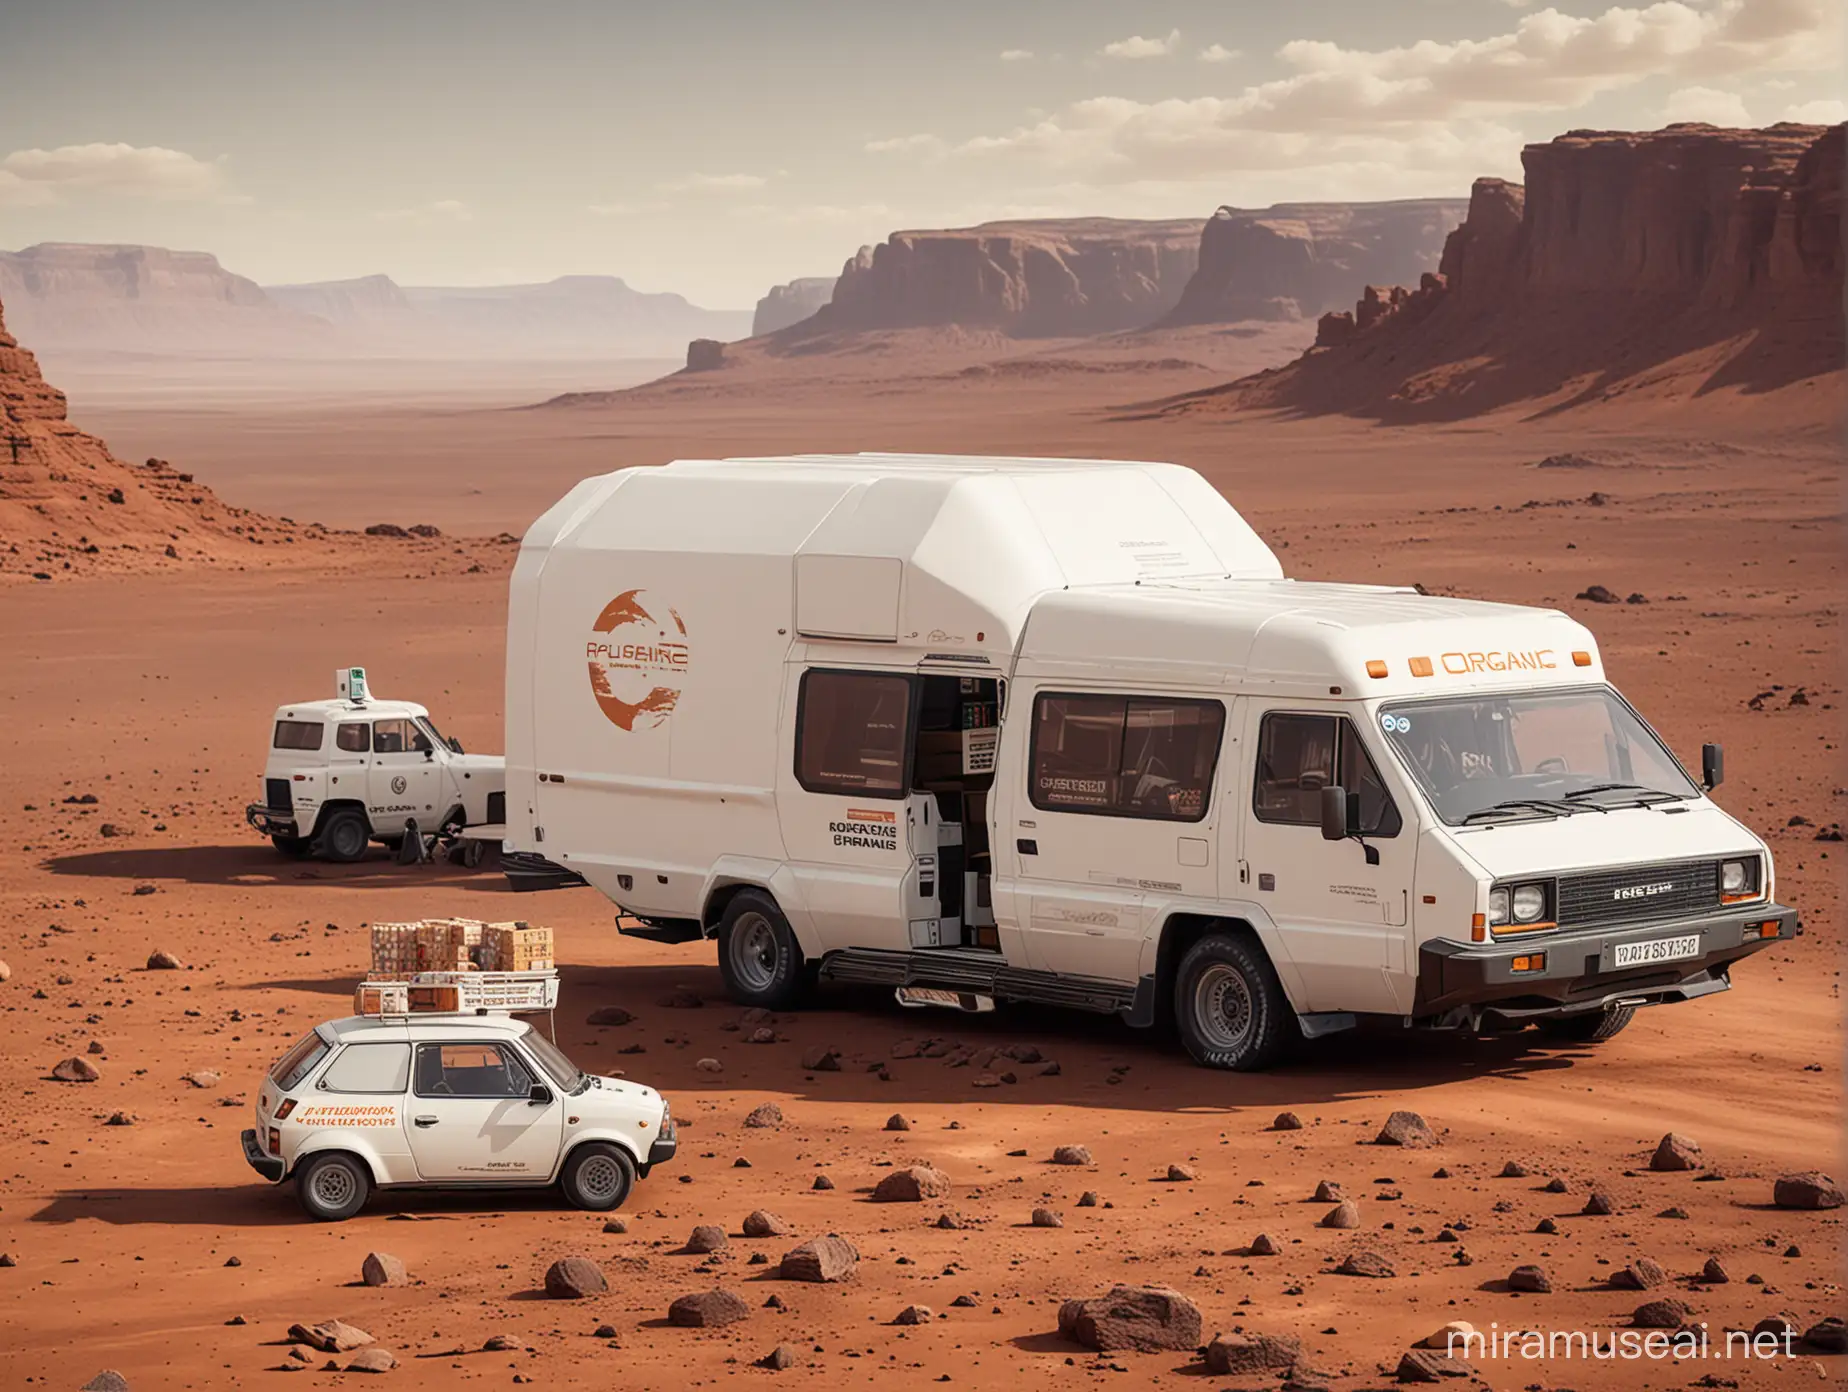 a realistic photo of a planet organic store (the london-based supermarket brand) on the surface of mars, with a white delivery van bearing the company logo parked out front, the van should have no wheels and instead be a hover vehicle similar delorean from the back to the future films